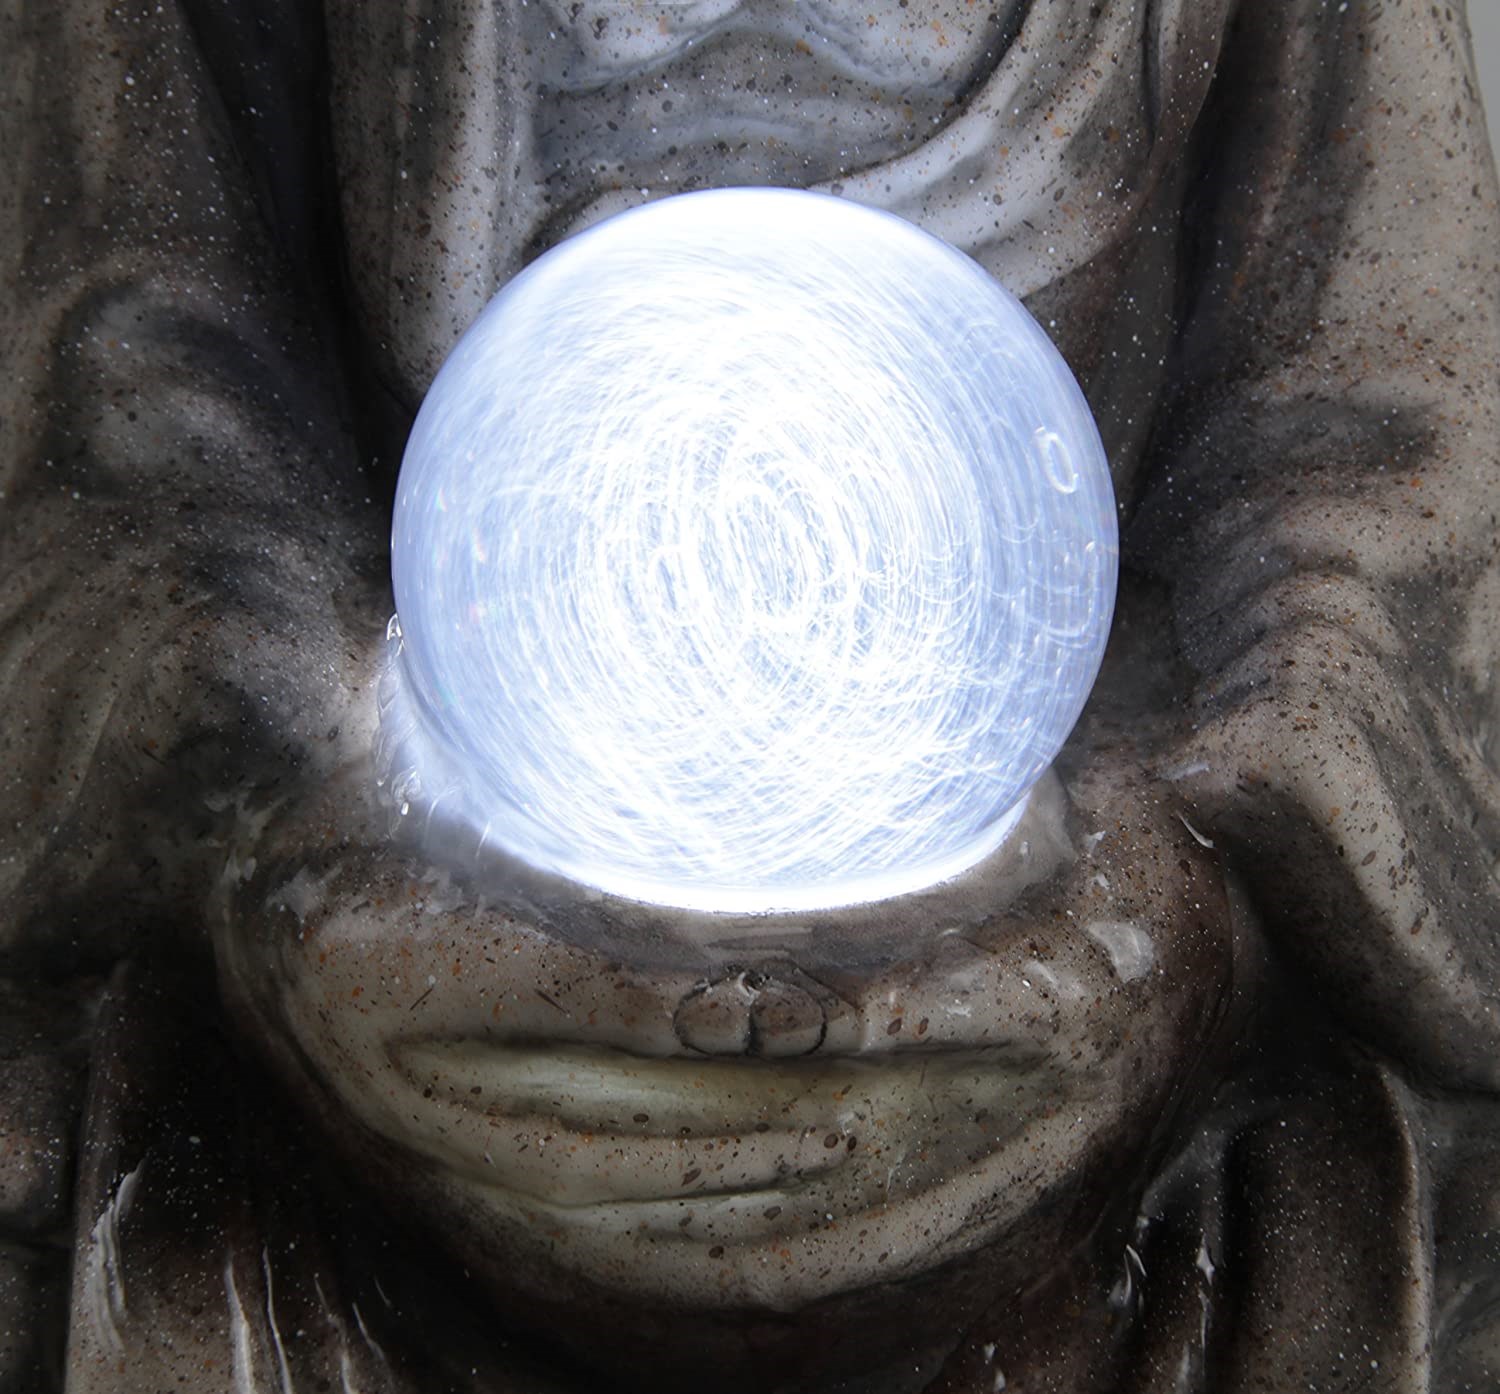 Buddha & Crystal Ball Water Feature w/ LED Lights | Ambienté